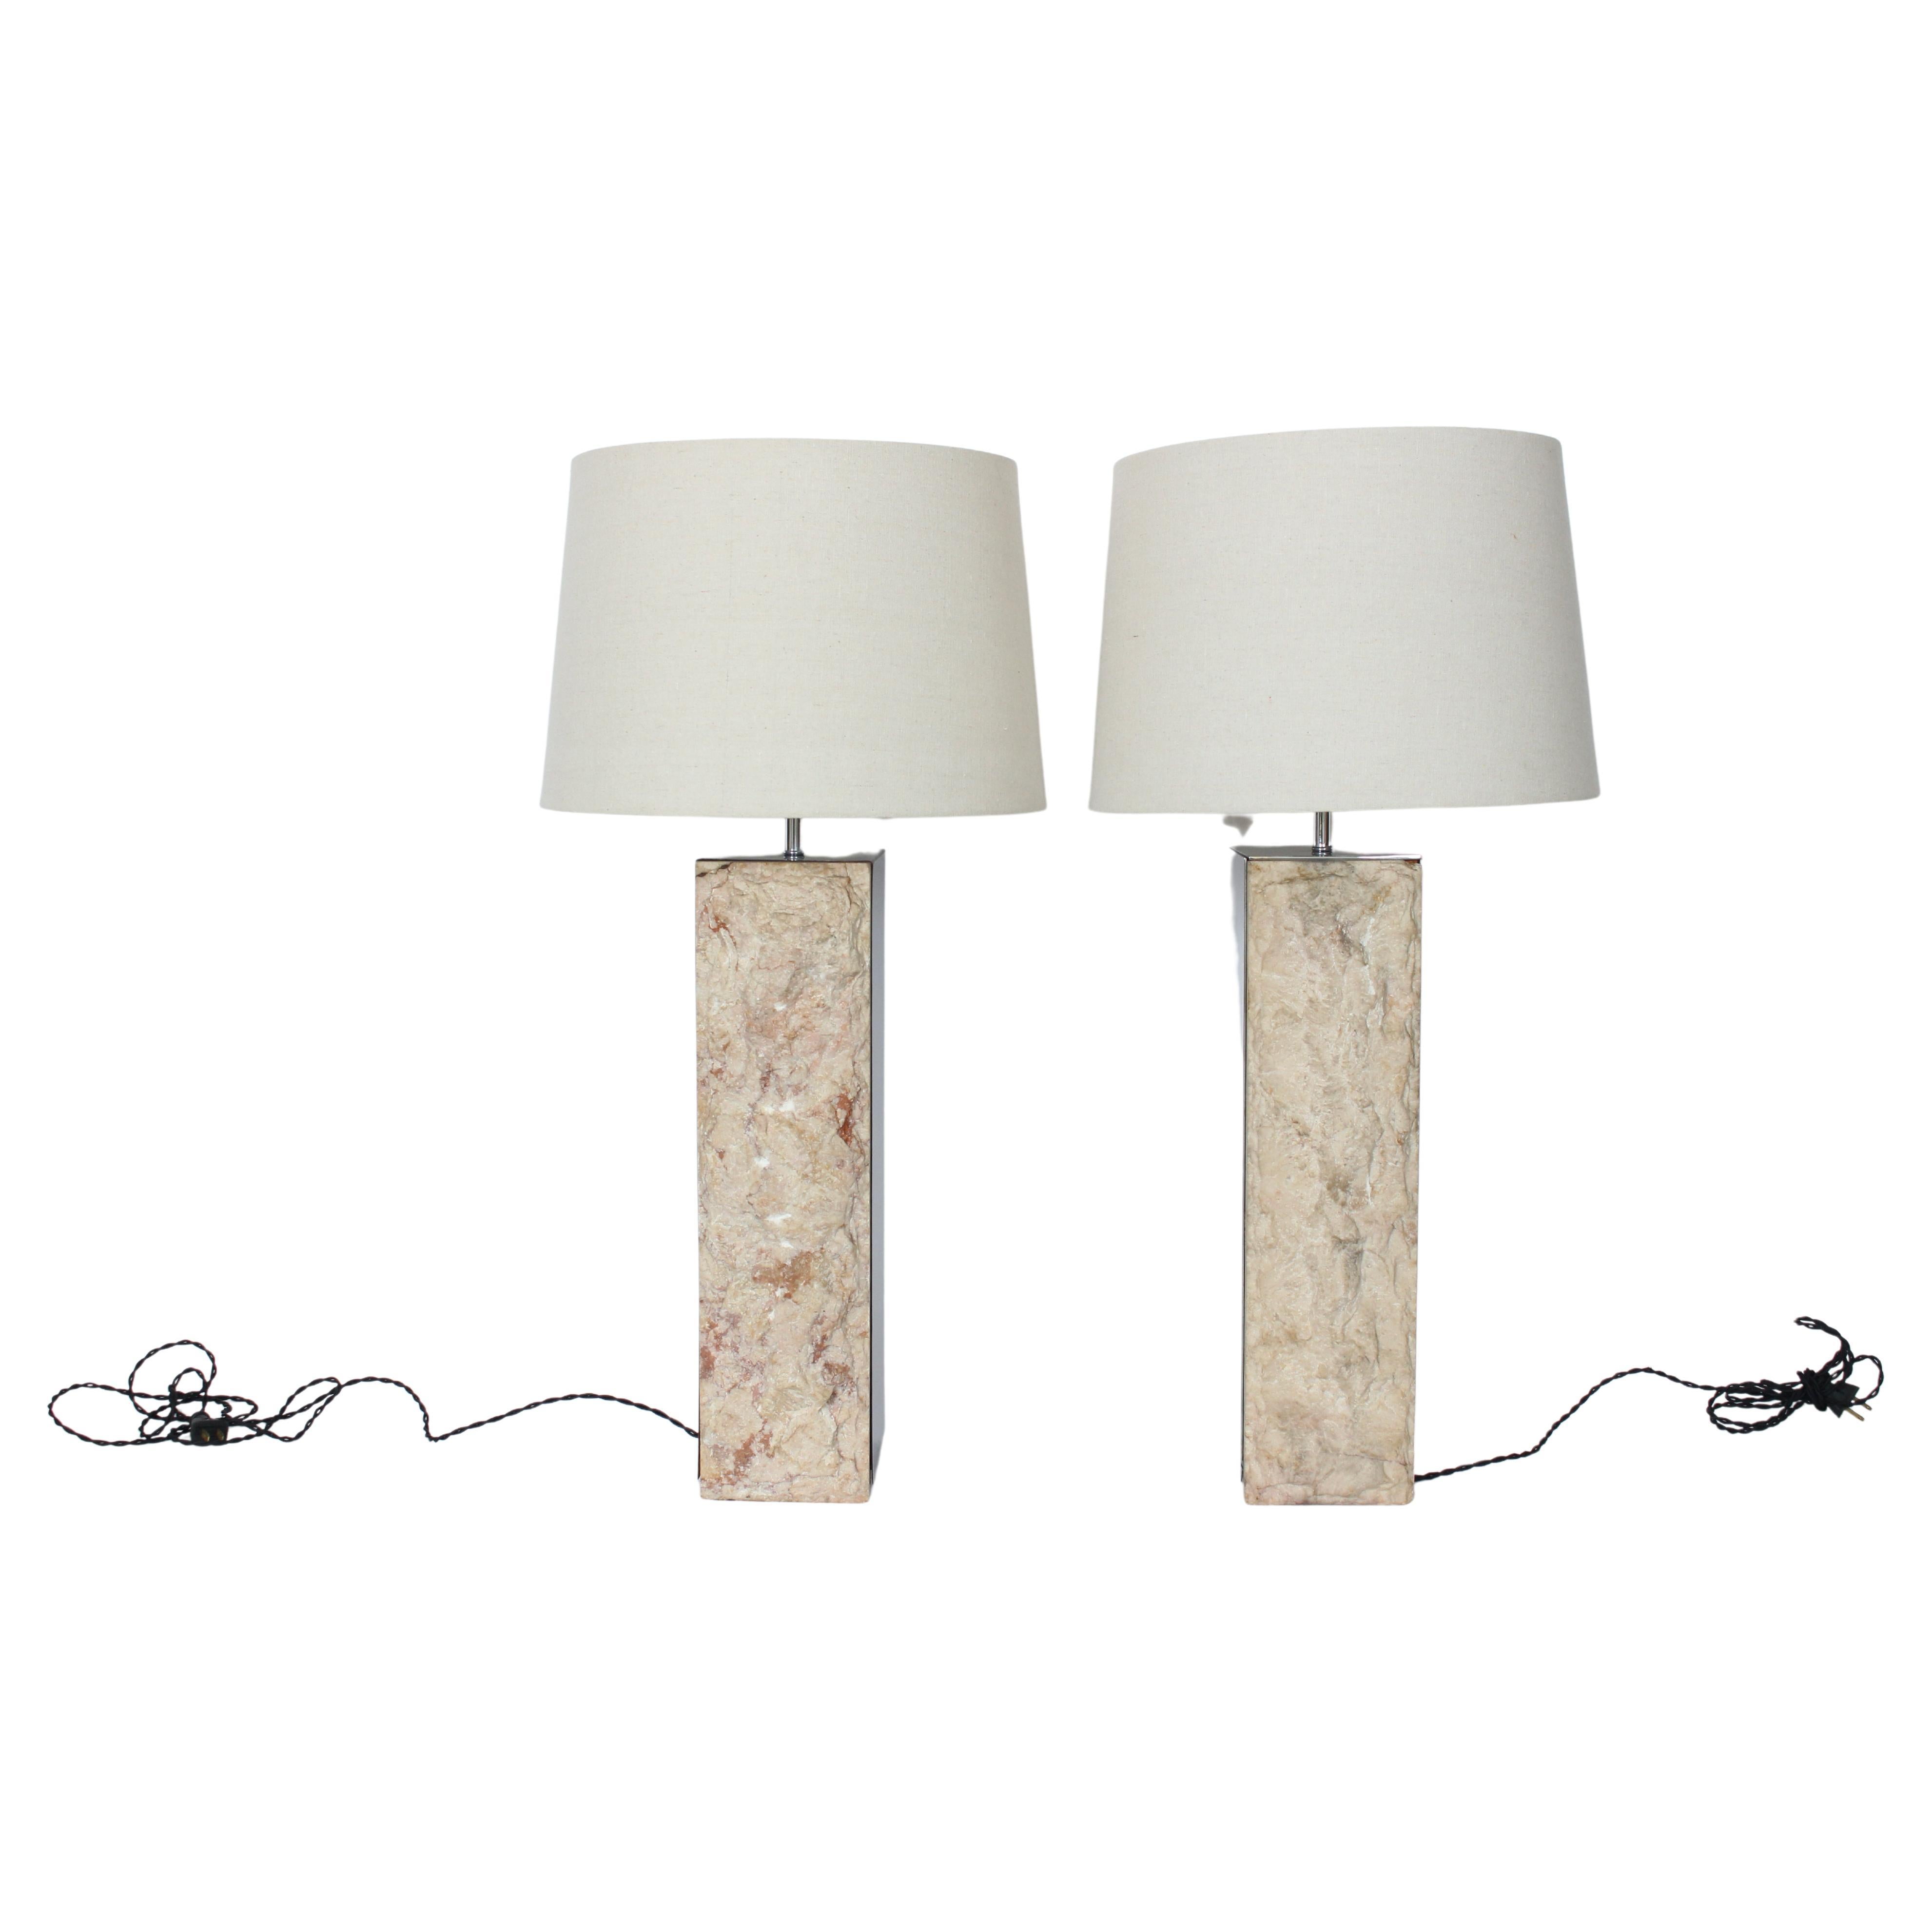 Pair of Laurel Lamp Co. attributed Rough Cut Marble & Polished Aluminum Table Lamps. In the spirit Robert Smithson.  Featuring two, two sided panels, with two in Cream, Beige, Taupe with hints of Pink Italian Marble and two reflective (18.5H x 5D)